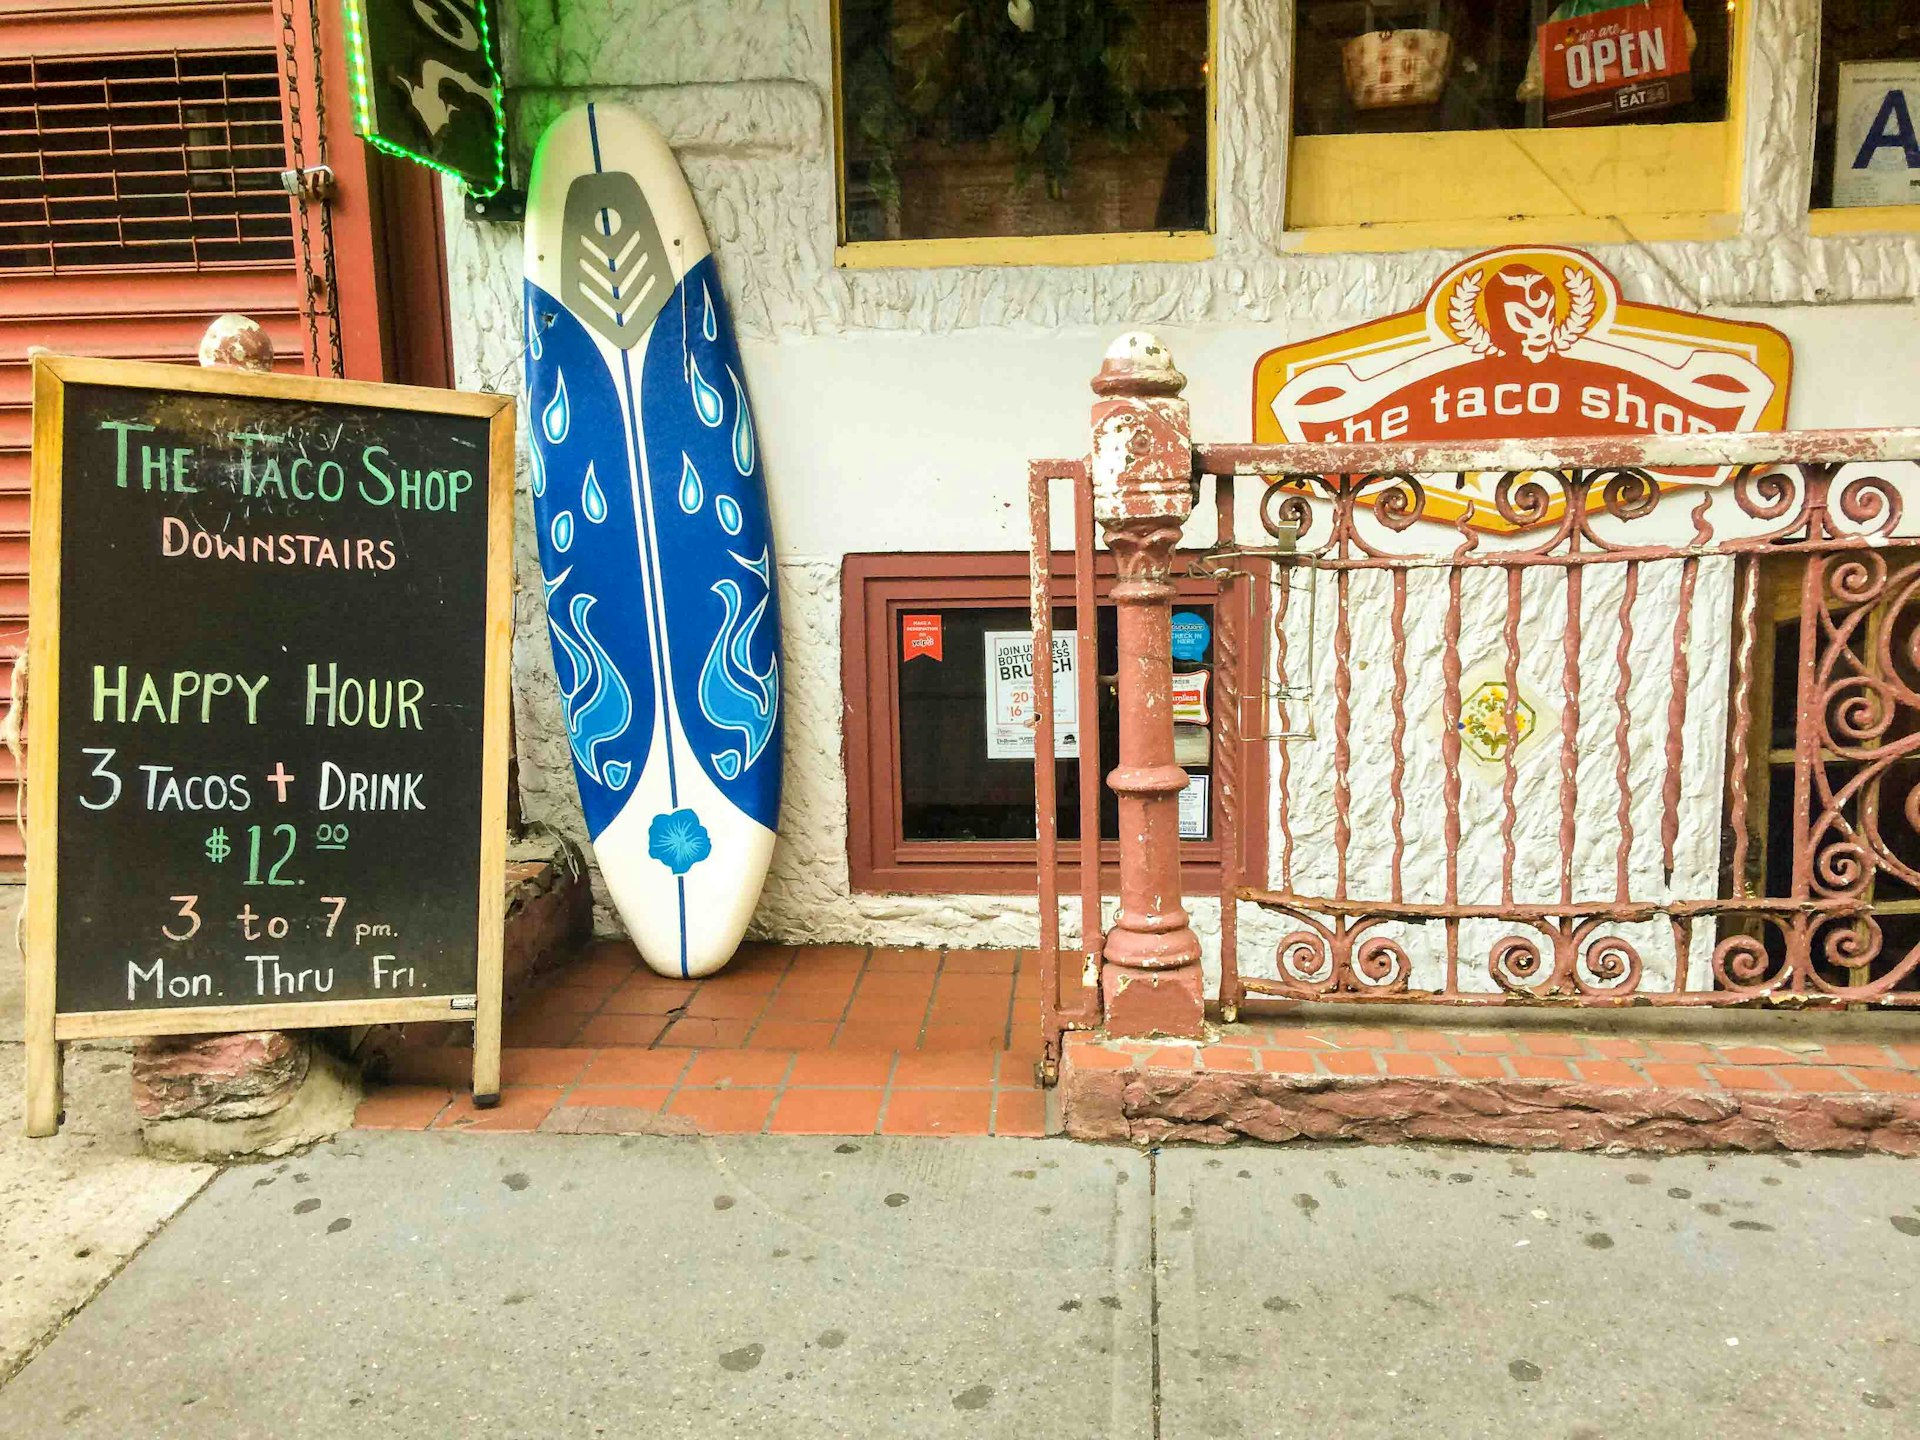 The unassuming entrance to The Taco Shop in Brooklyn.